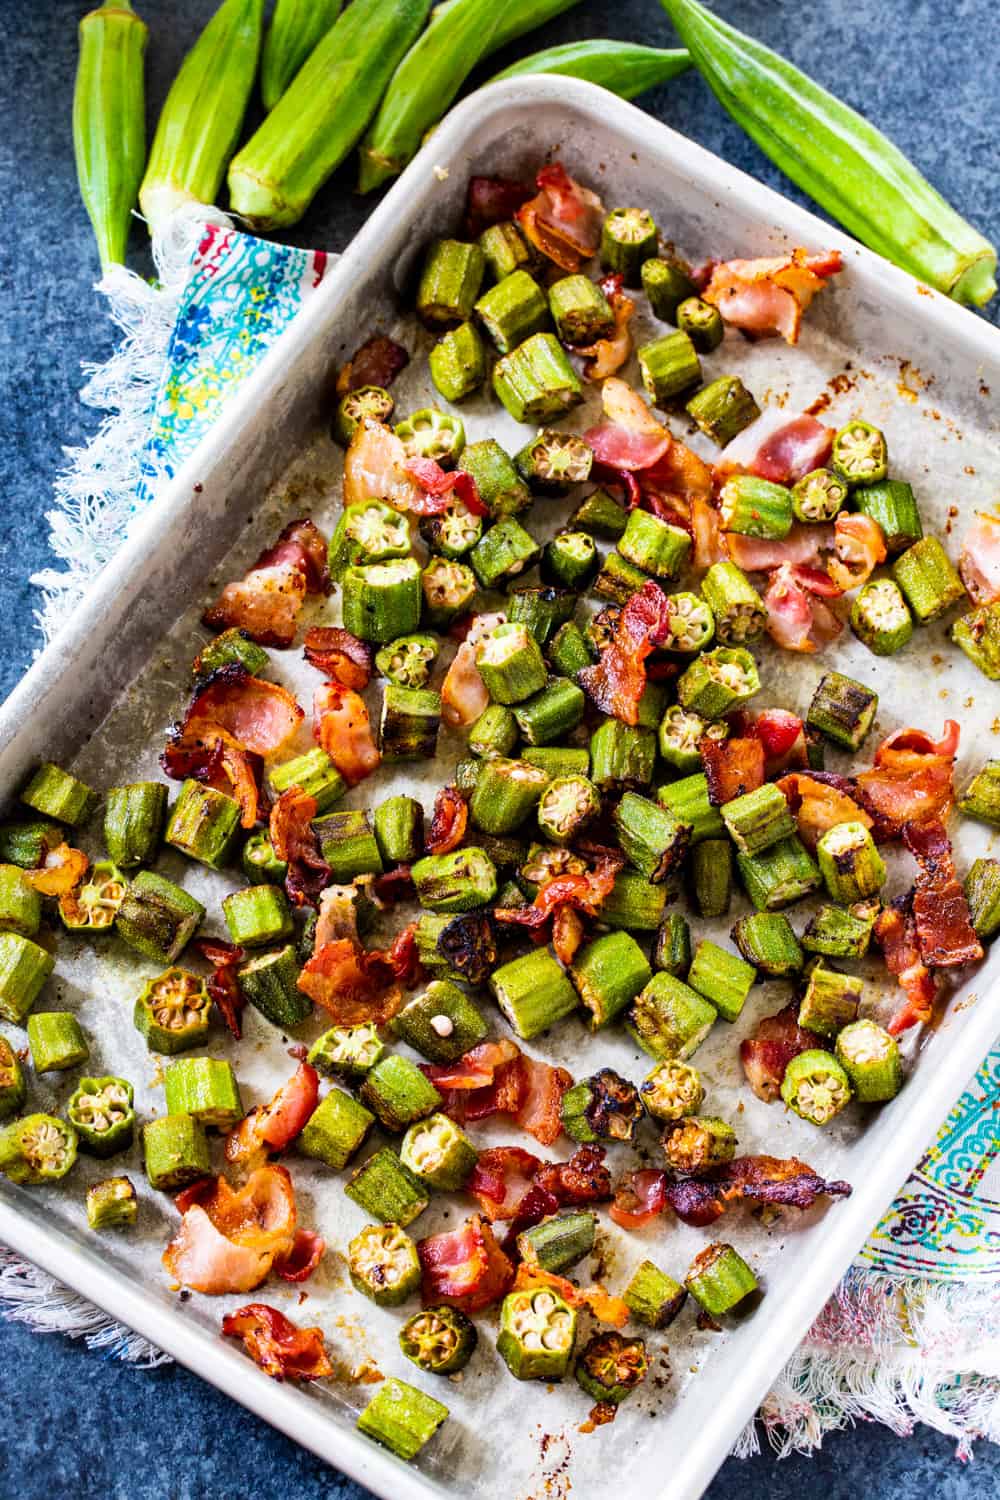 Okra and Bacon on rimmed baking sheet with fresh okra next to it.